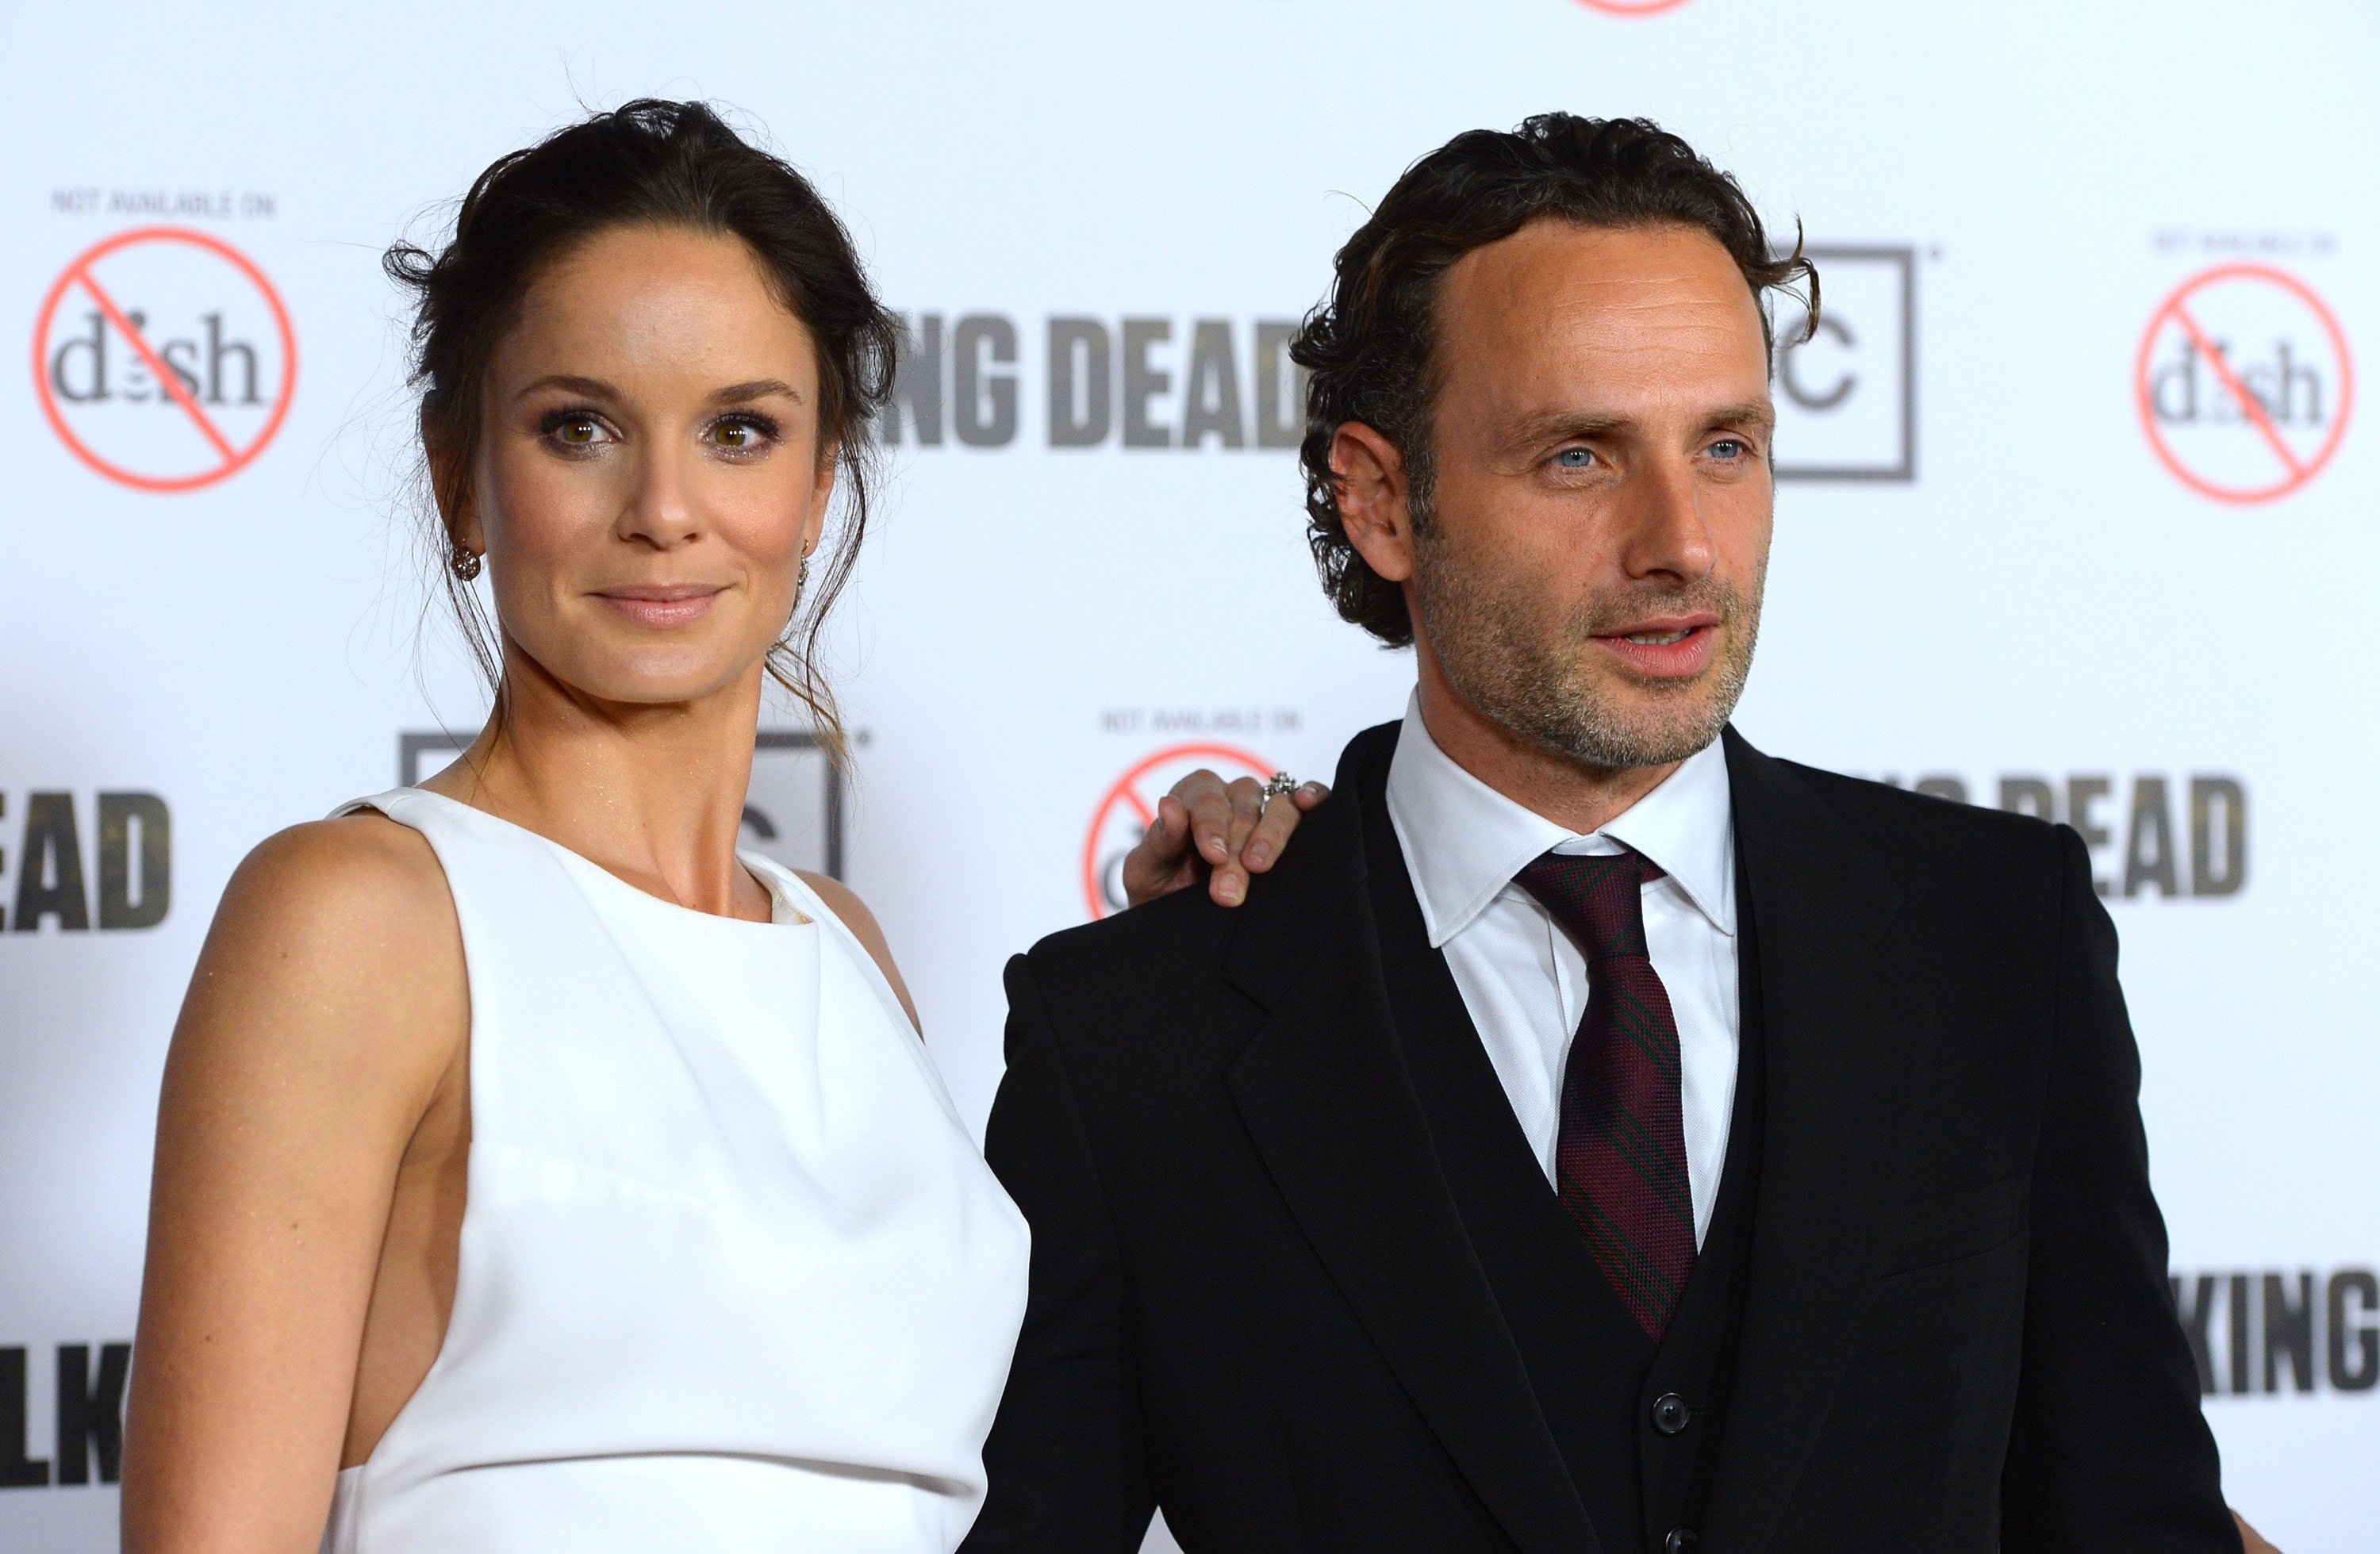 Sarah Wayne Callies and Andrew Lincoln arrives at the premiere of AMC's "The Walking Dead" 3rd Season at Universal CityWalk on October 4, 2012 in Universal City, California. | Photo: GettyImages